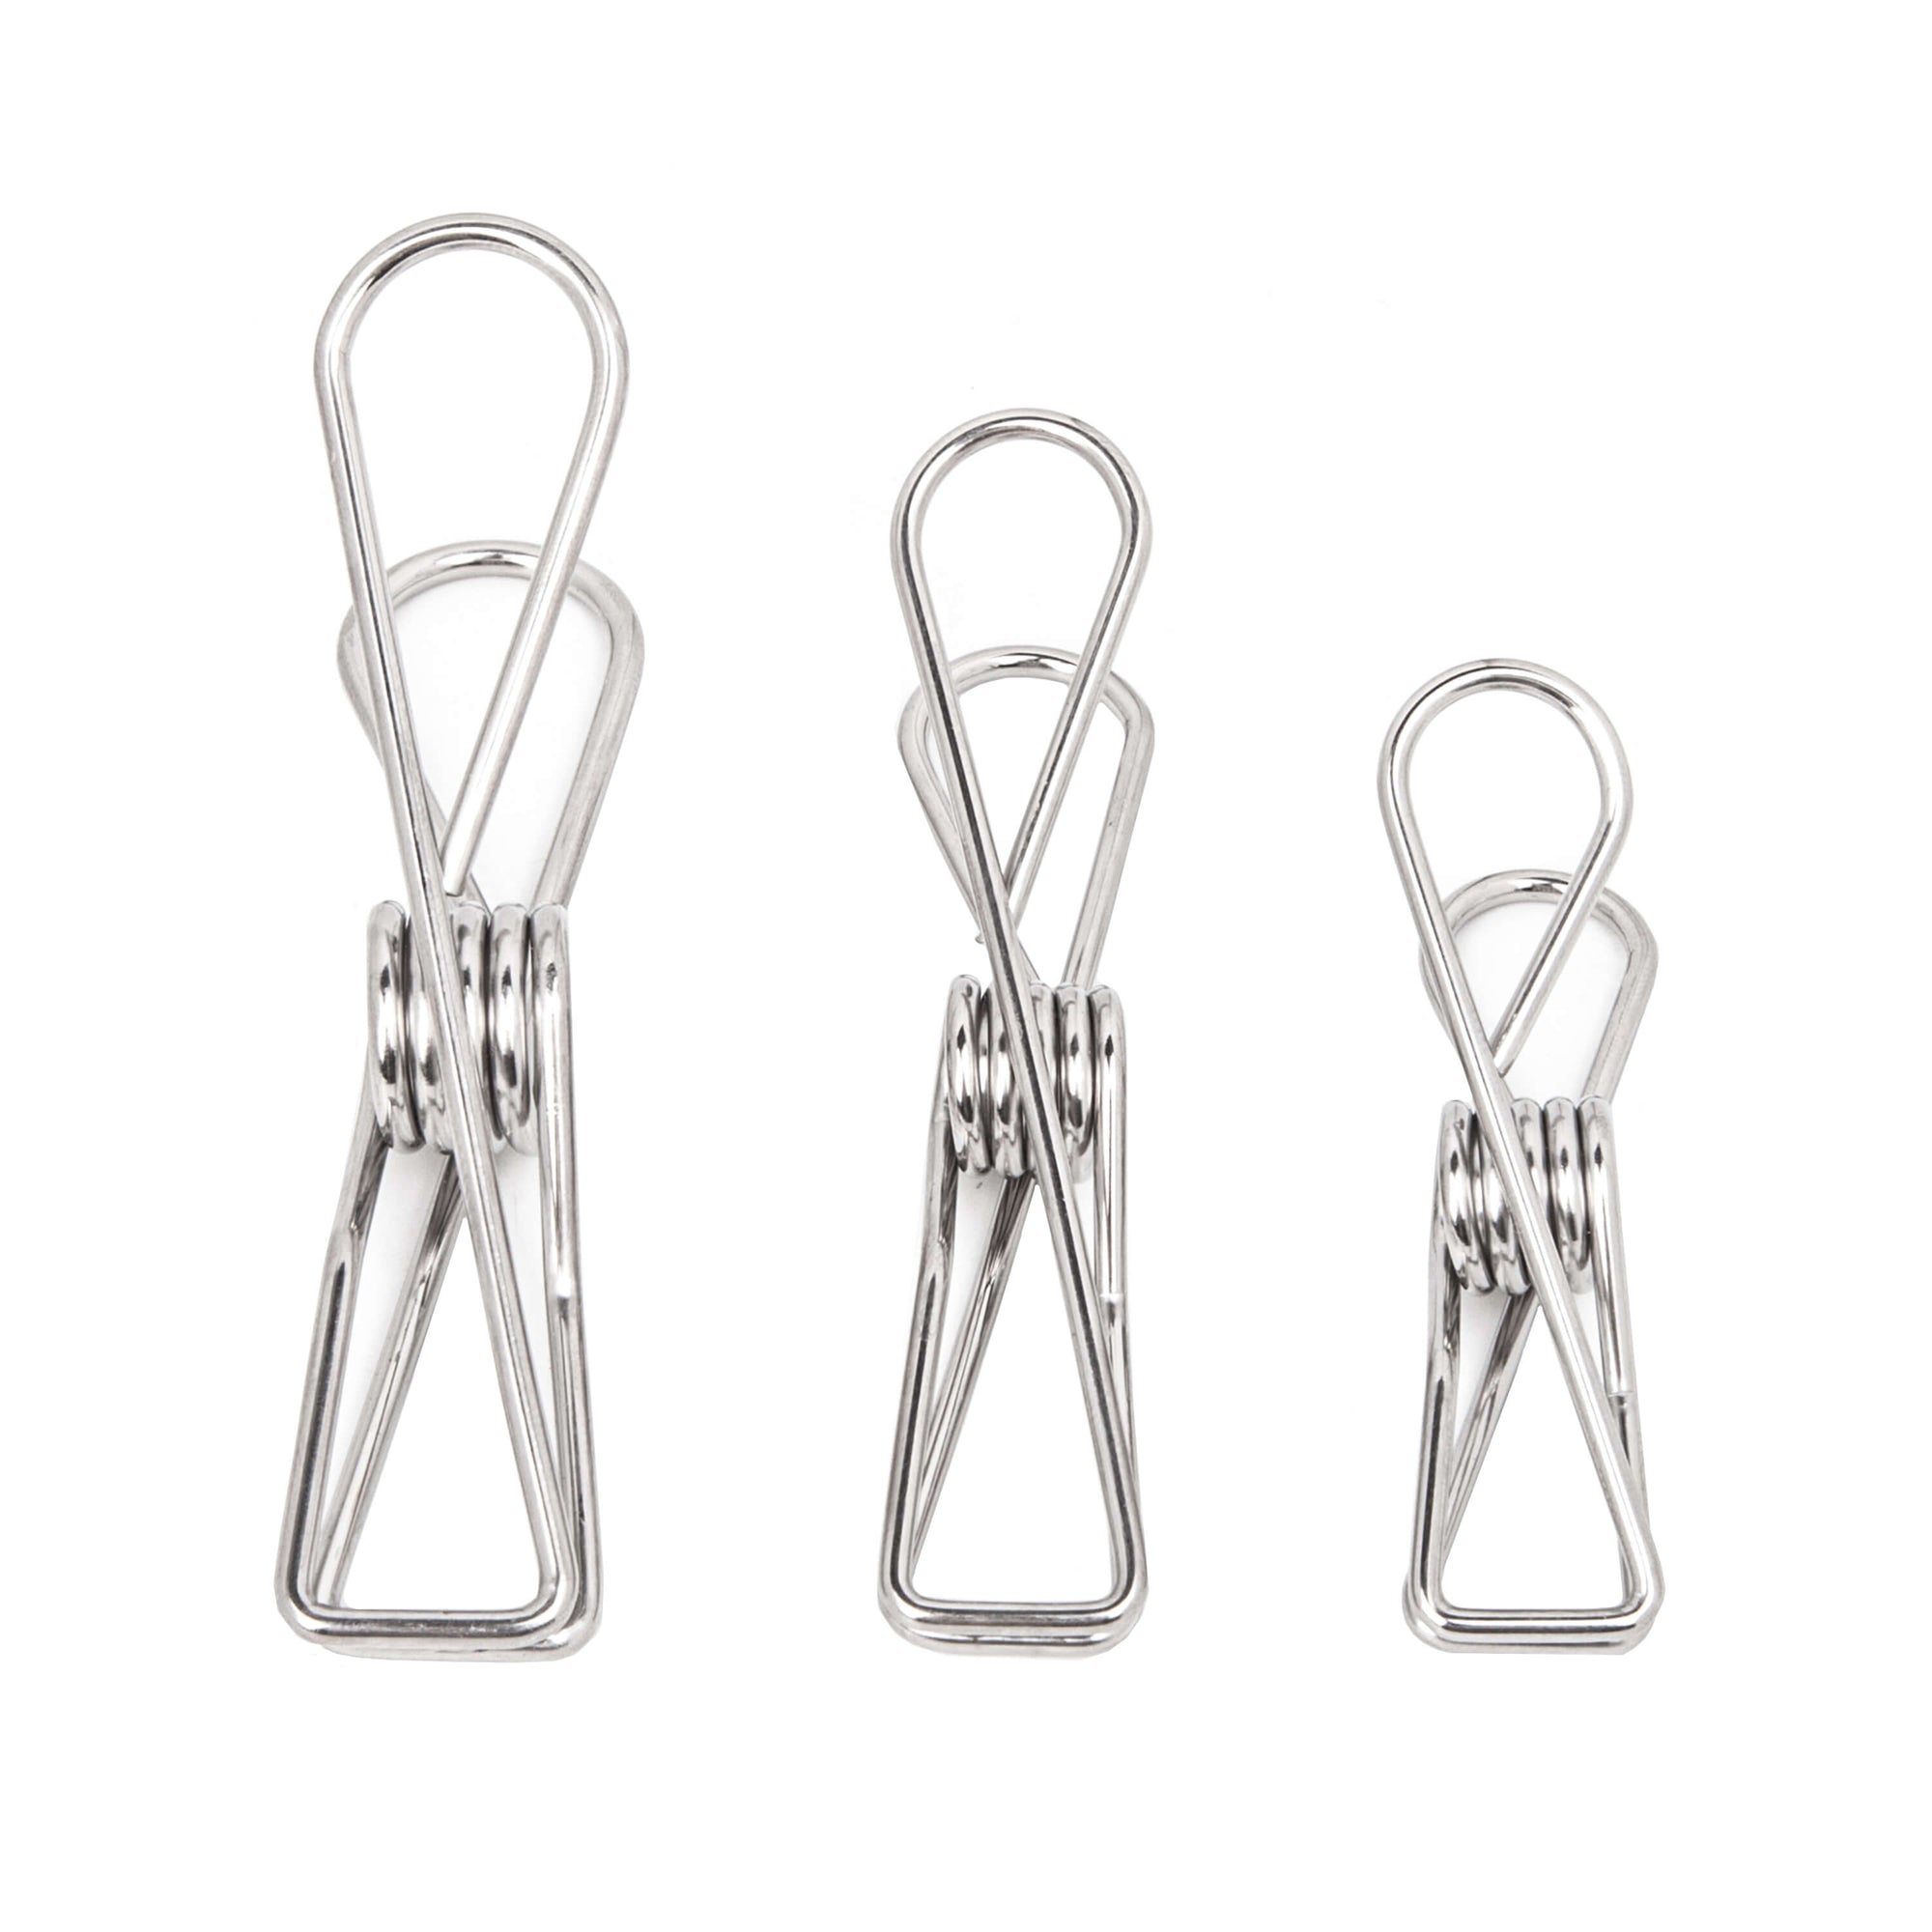 6PCS Sample Pack Silver Stainless Clothing Pegs - EcoLuxe Living